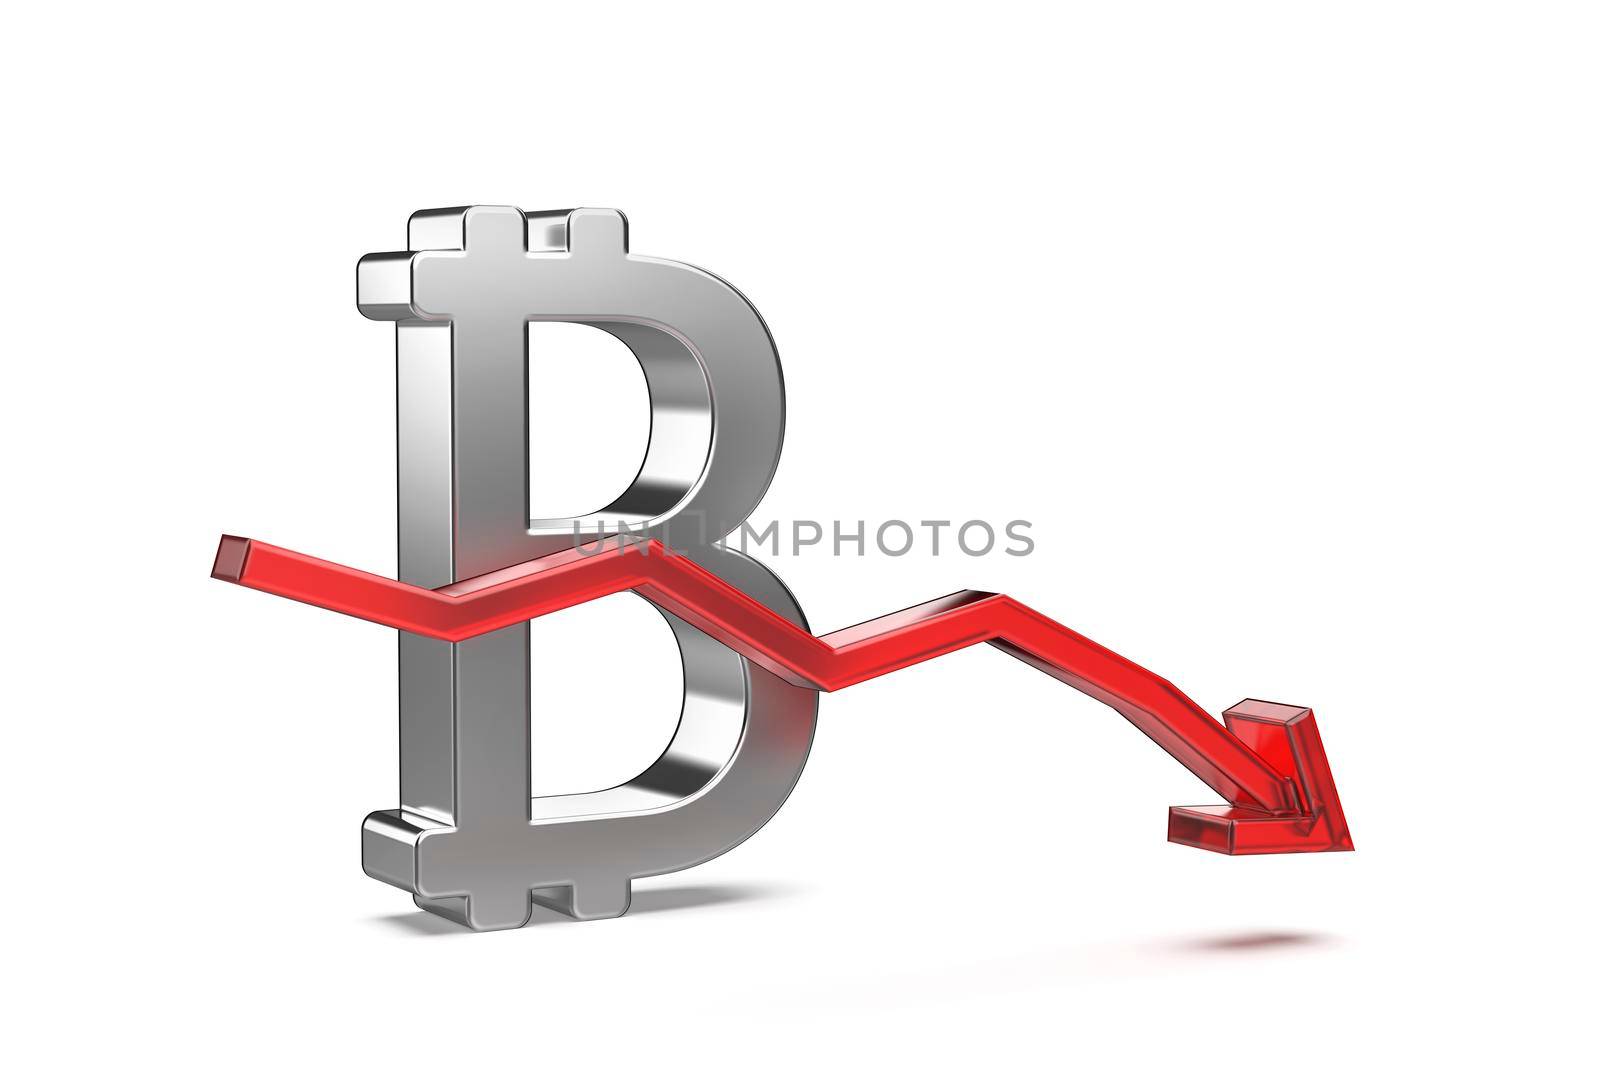 Bitcoin symbol with red arrow pointing down
 by magraphics